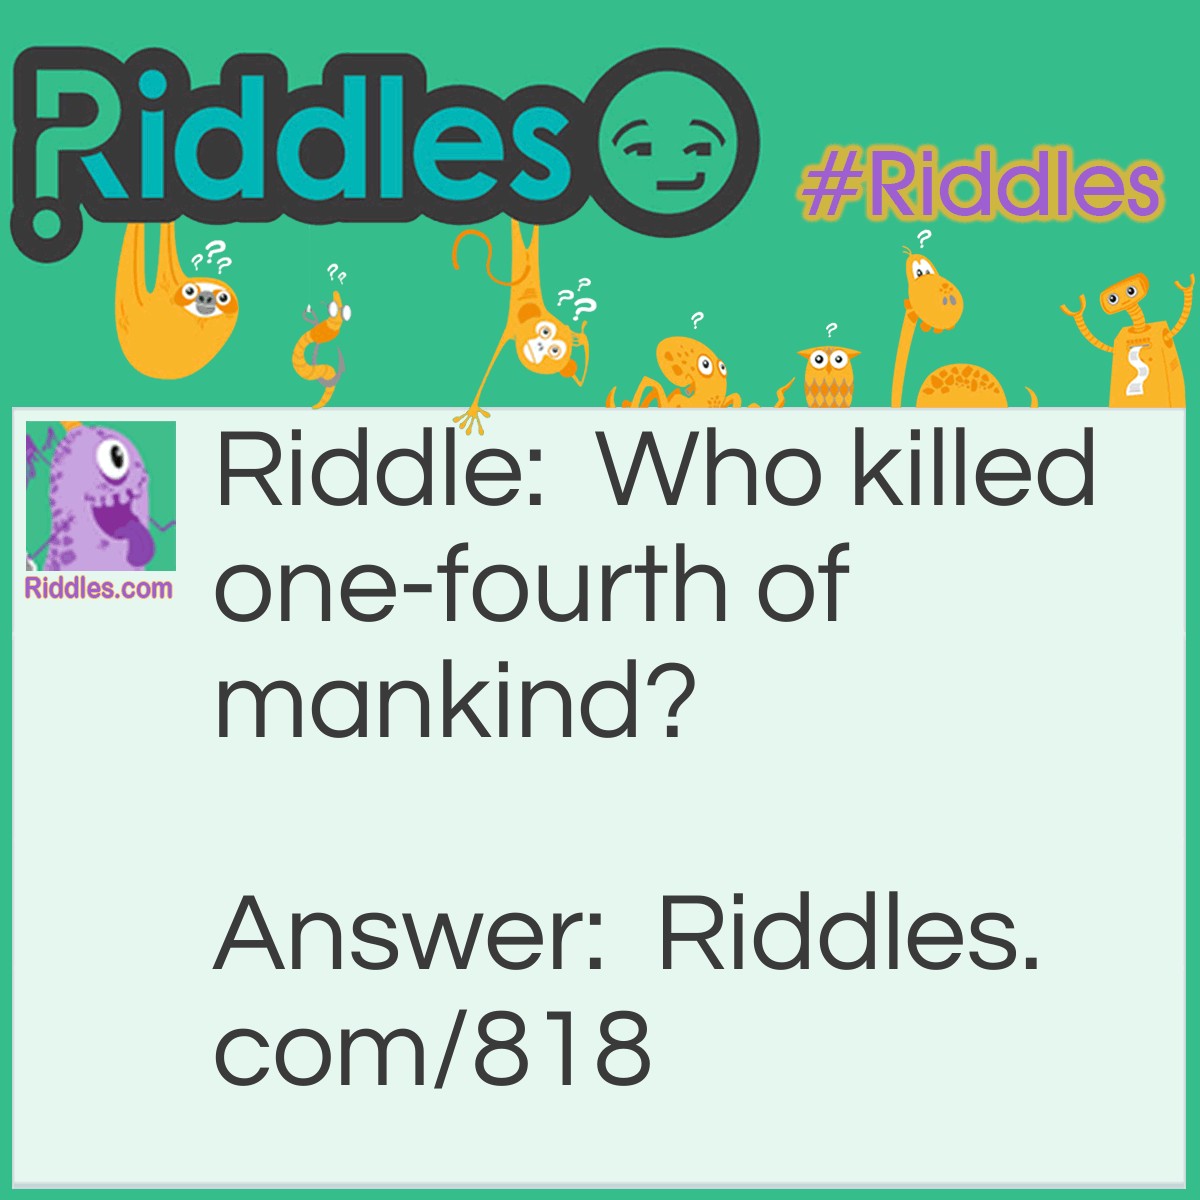 Riddle: Who killed one-fourth of mankind? Answer: Cain (who killed Abel, leaving only himself, Adam and Eve).